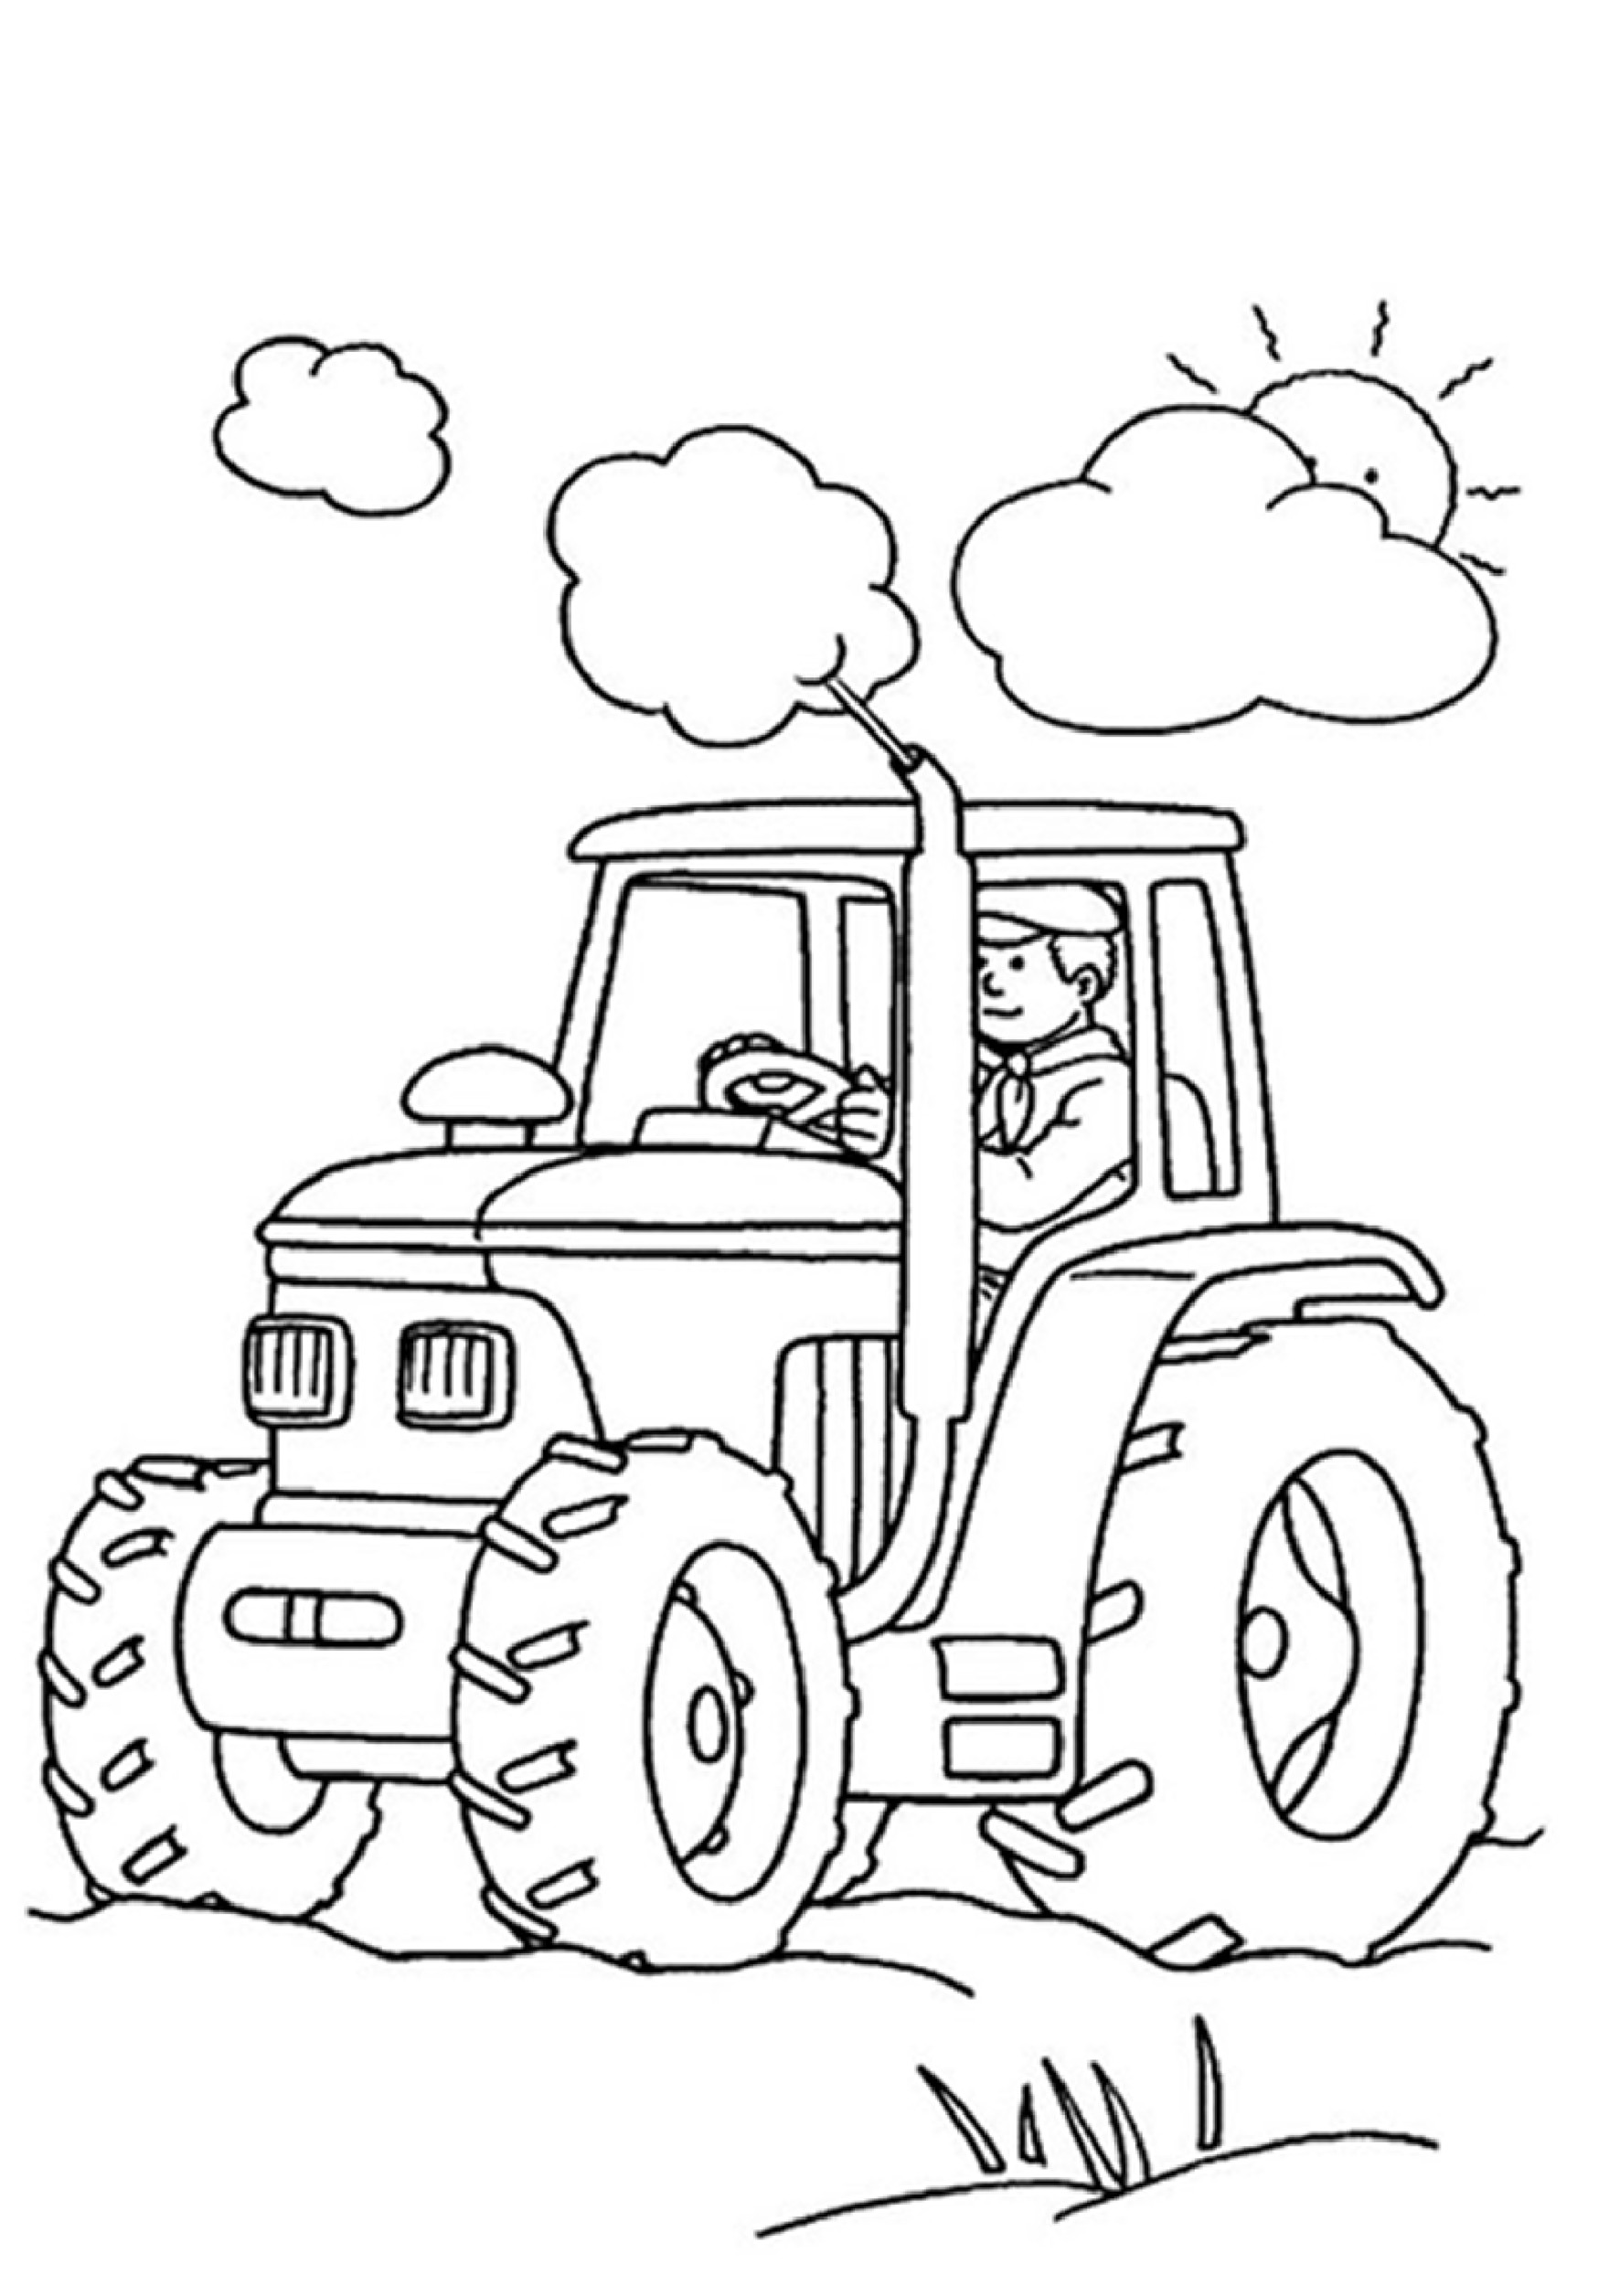 Coloring Sheets For Little Boys
 Coloring pages for boys